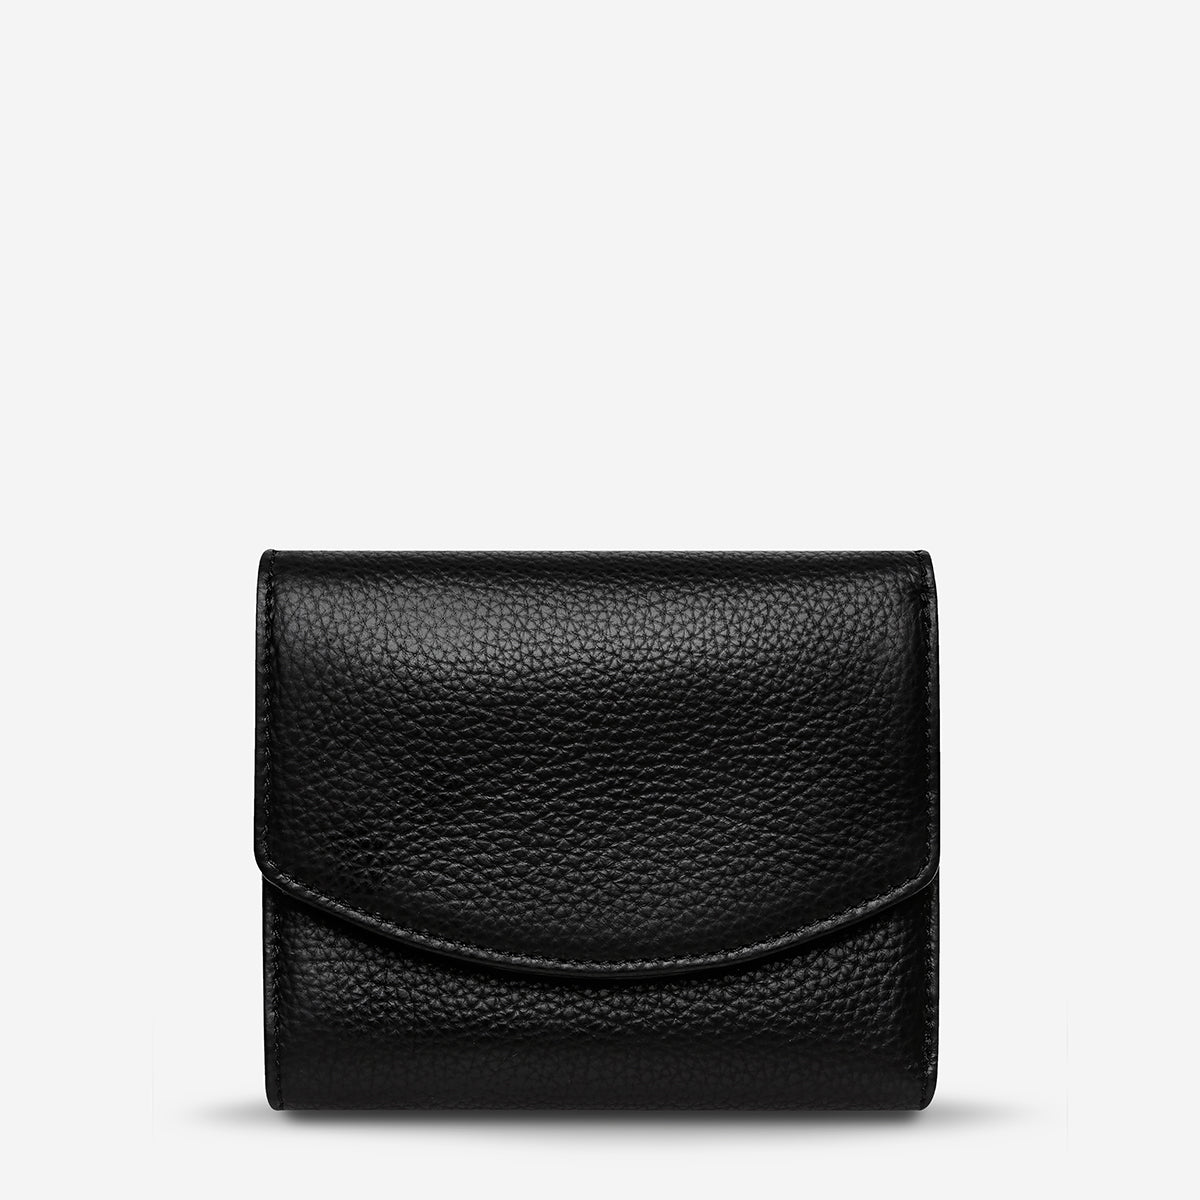 FOSSIL HANDBAGS AND WALLETS NEW ZEALAND